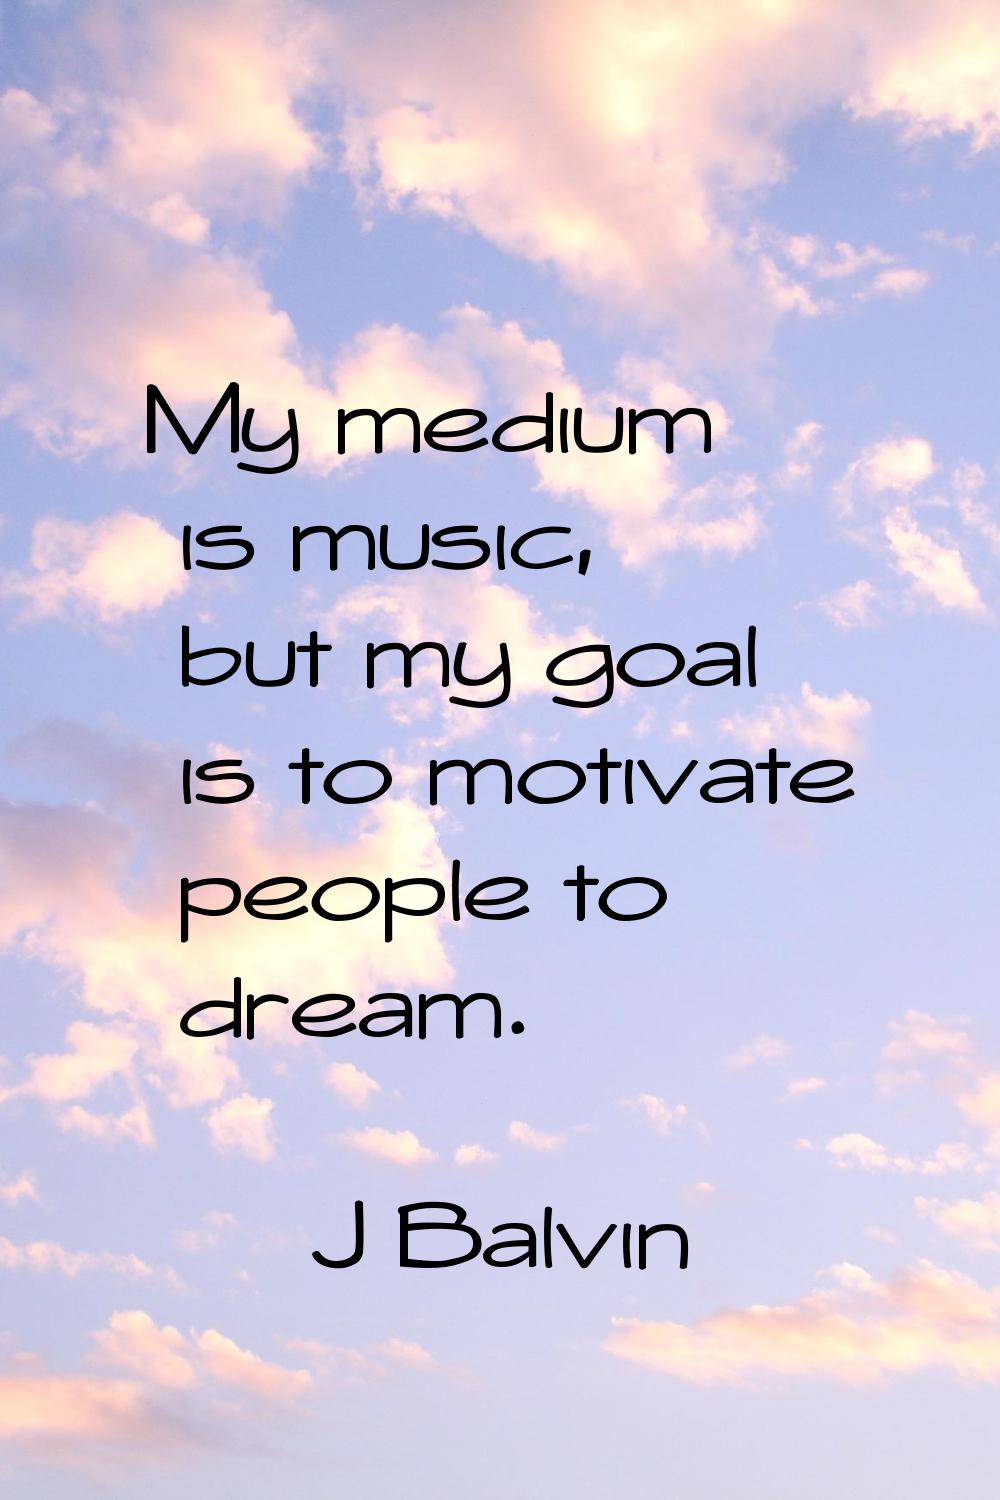 My medium is music, but my goal is to motivate people to dream.